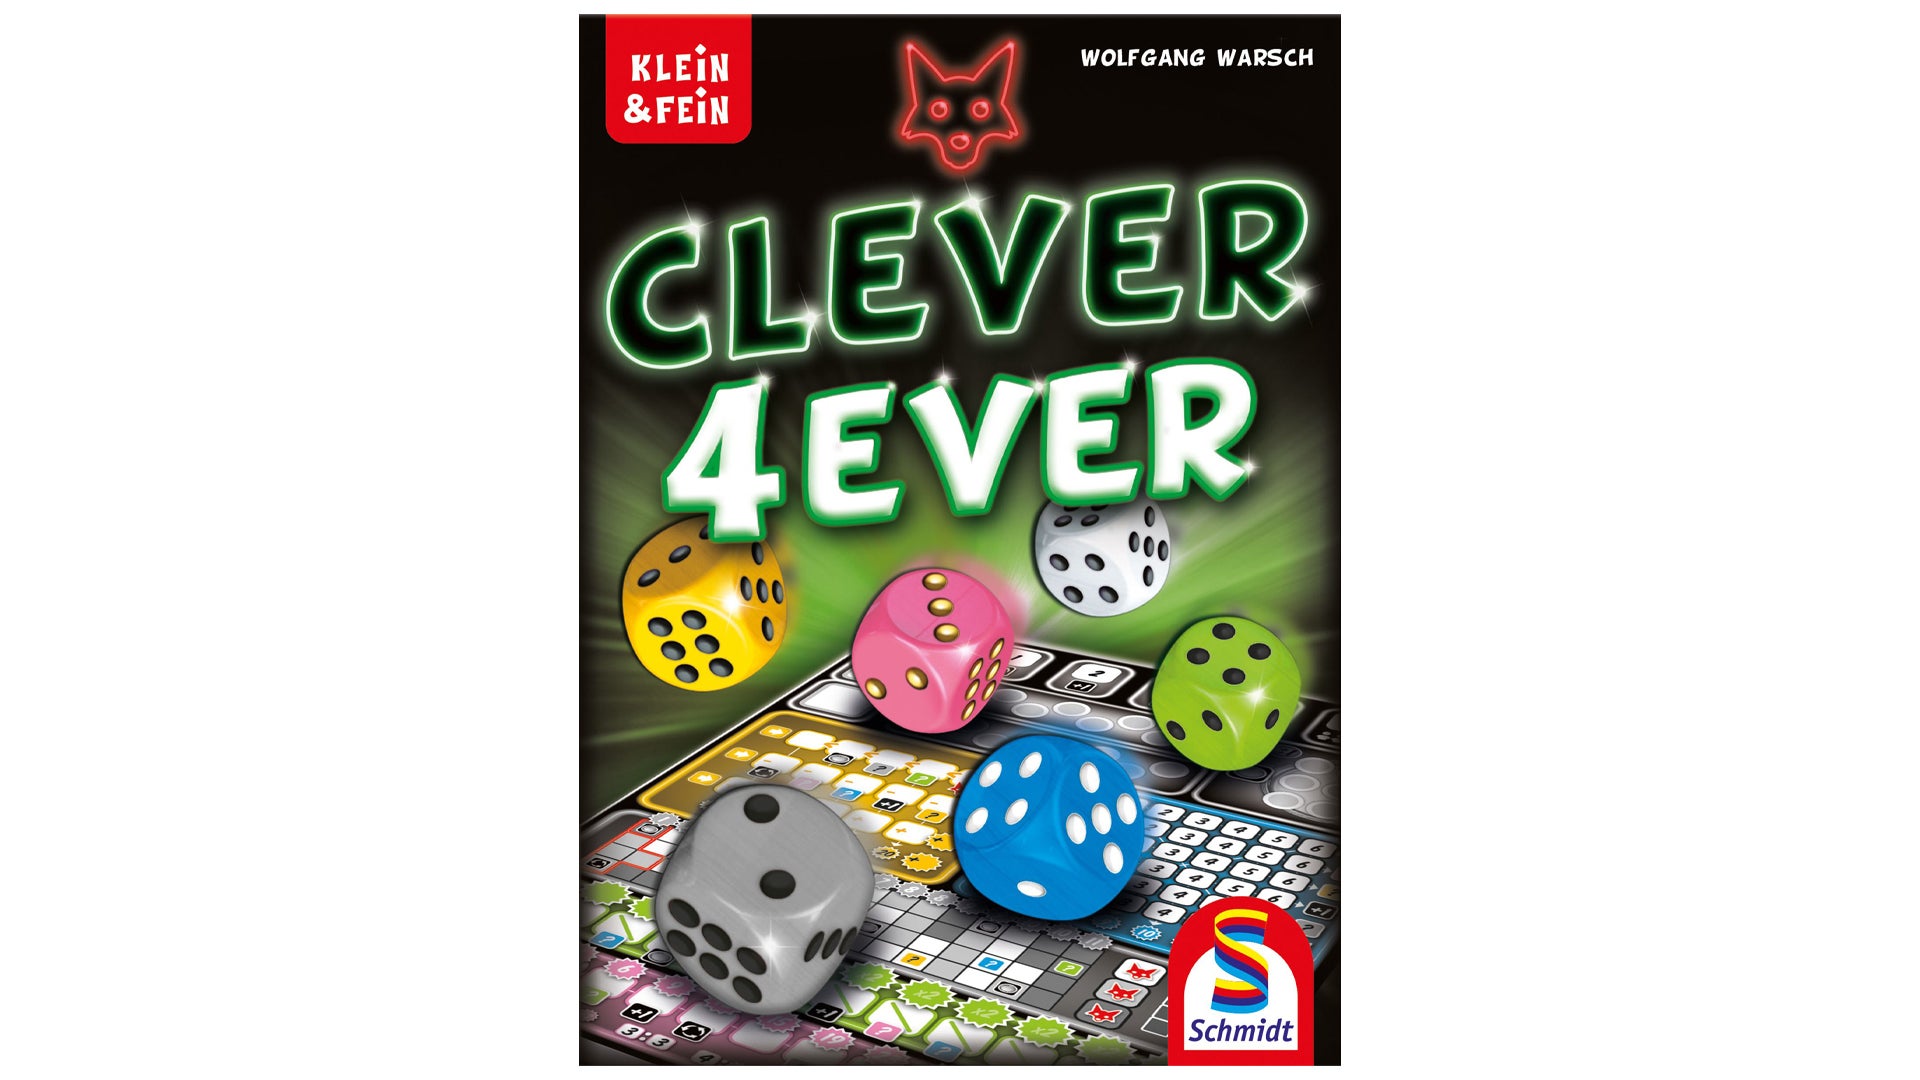 The cover of Clever 4Ever.